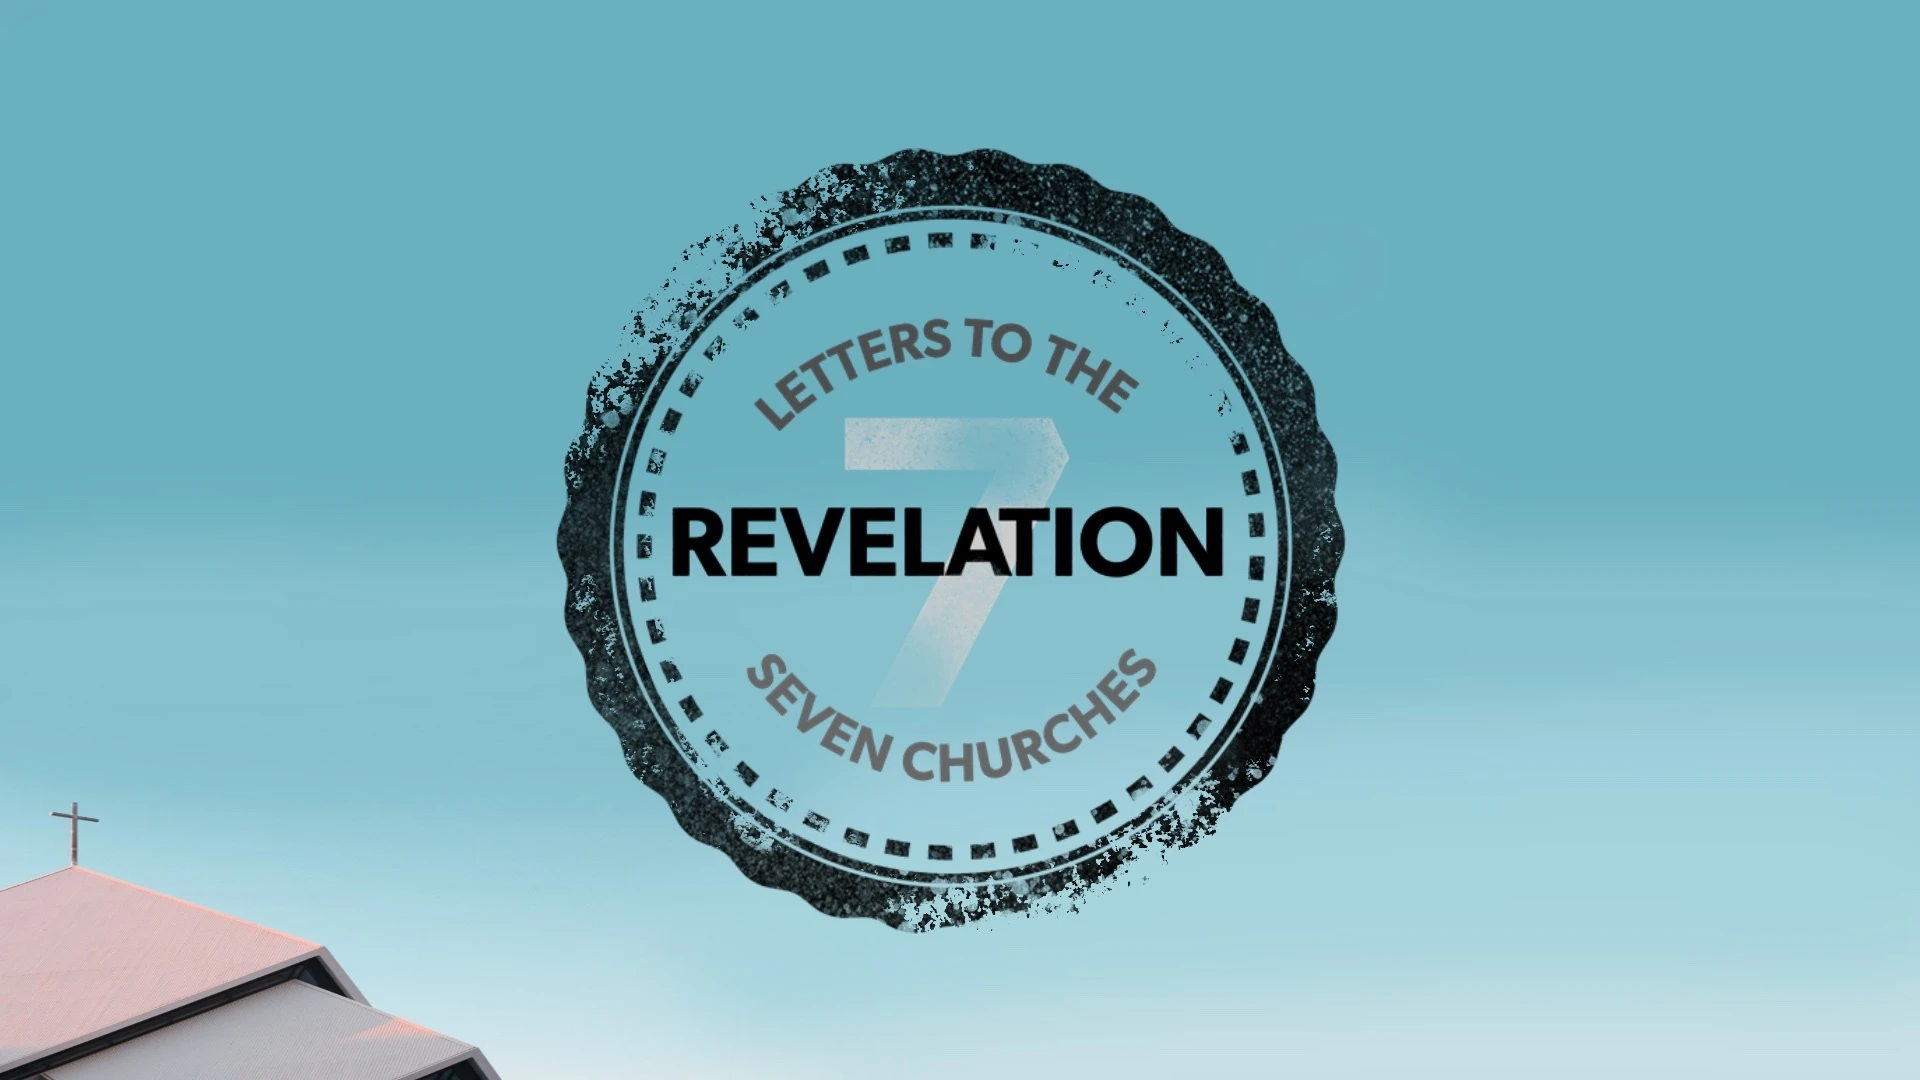 Letters to the seven churches